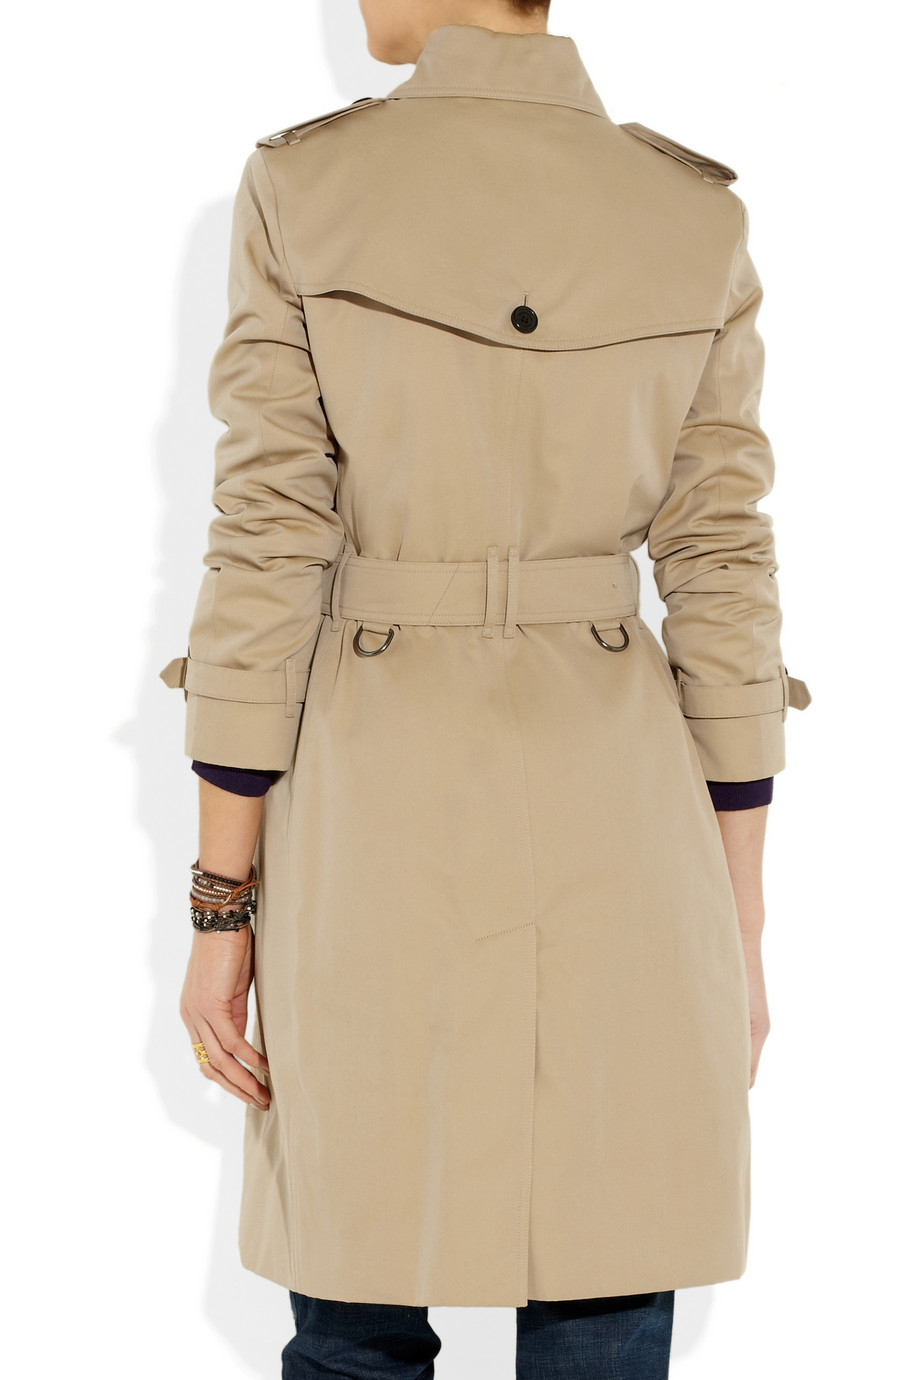 Lyst - Burberry Cotton-Twill Trench Coat in Brown